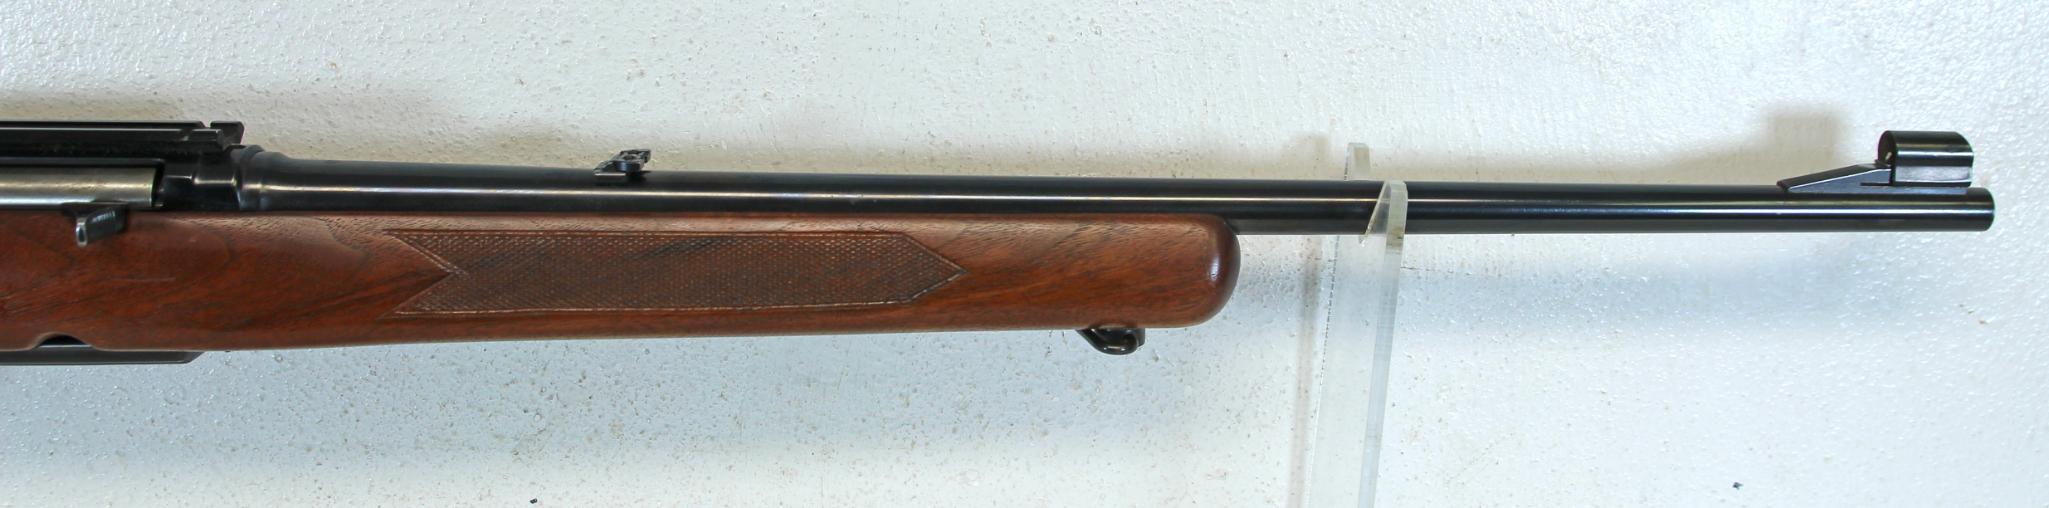 Winchester Model 100 .308 Win. Semi-Auto Rifle Scope Mount on Top of Receiver... Nice Checkered Wood